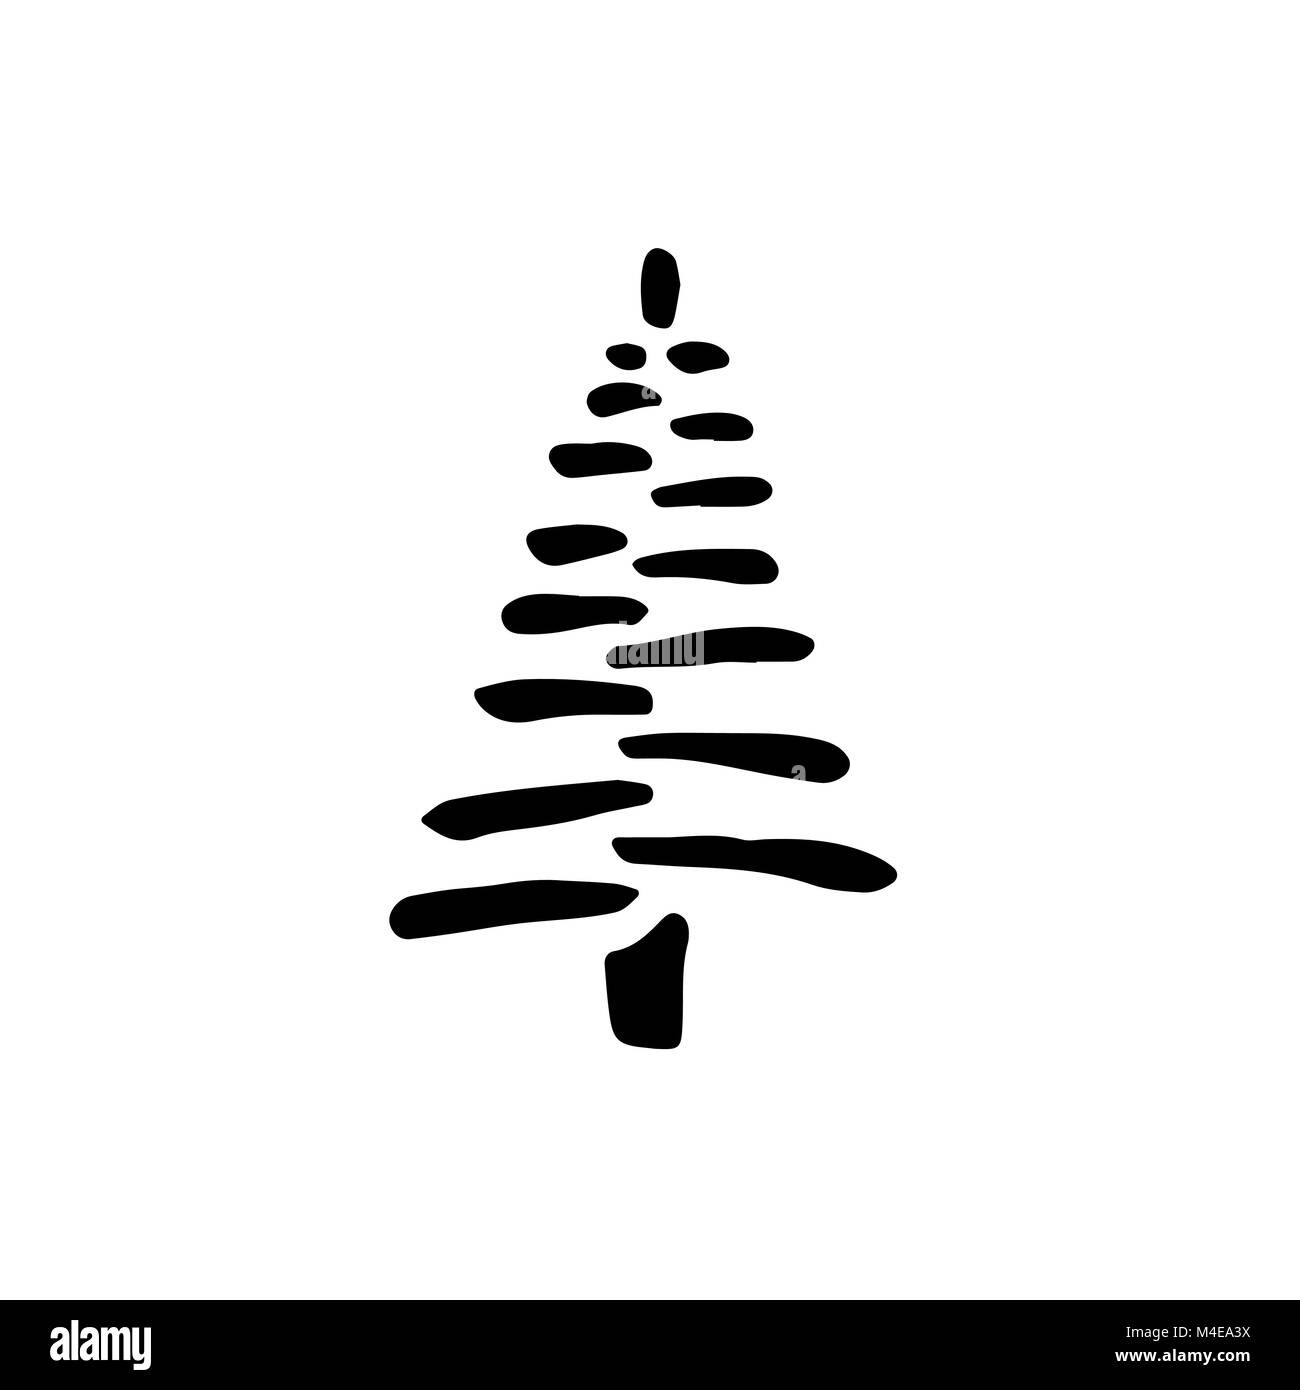 Fir black icon. Tree silhouette. Flat isolated element. Black and white vector illustration. Stock Vector